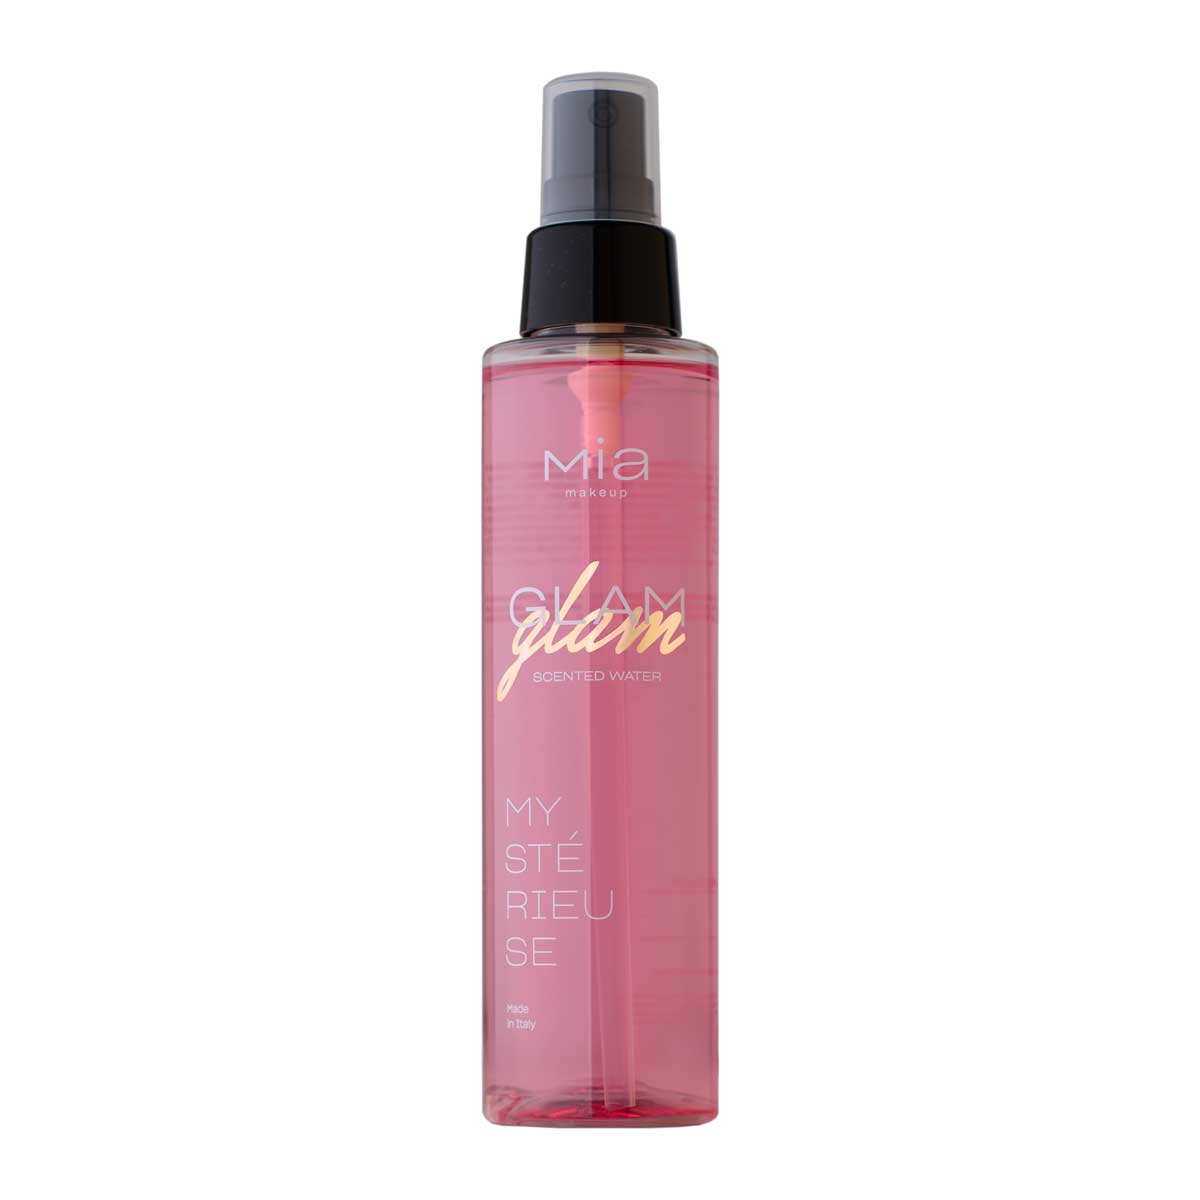 GLAM SCENTED WATER MISTERIEUSE – 150 ml